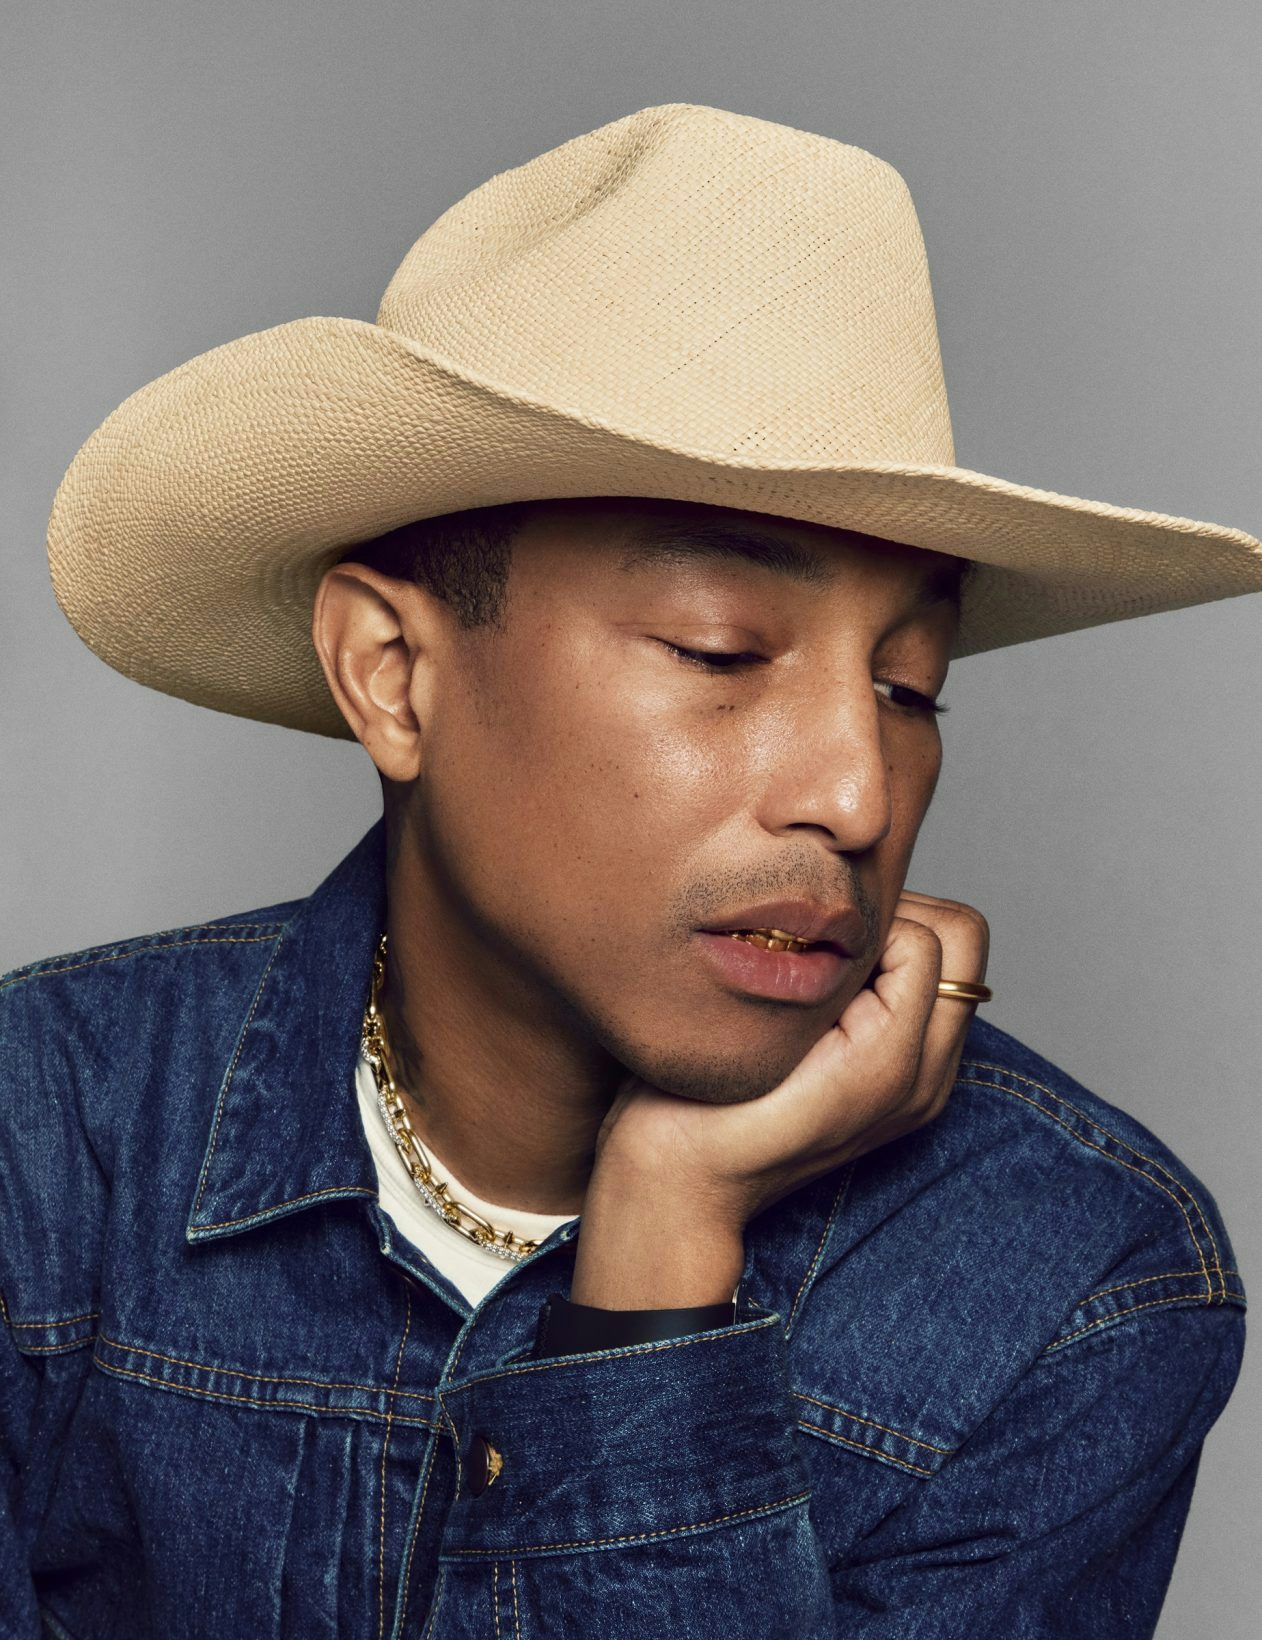 Tiffany unveils its first collection in collaboration with Pharrell Williams